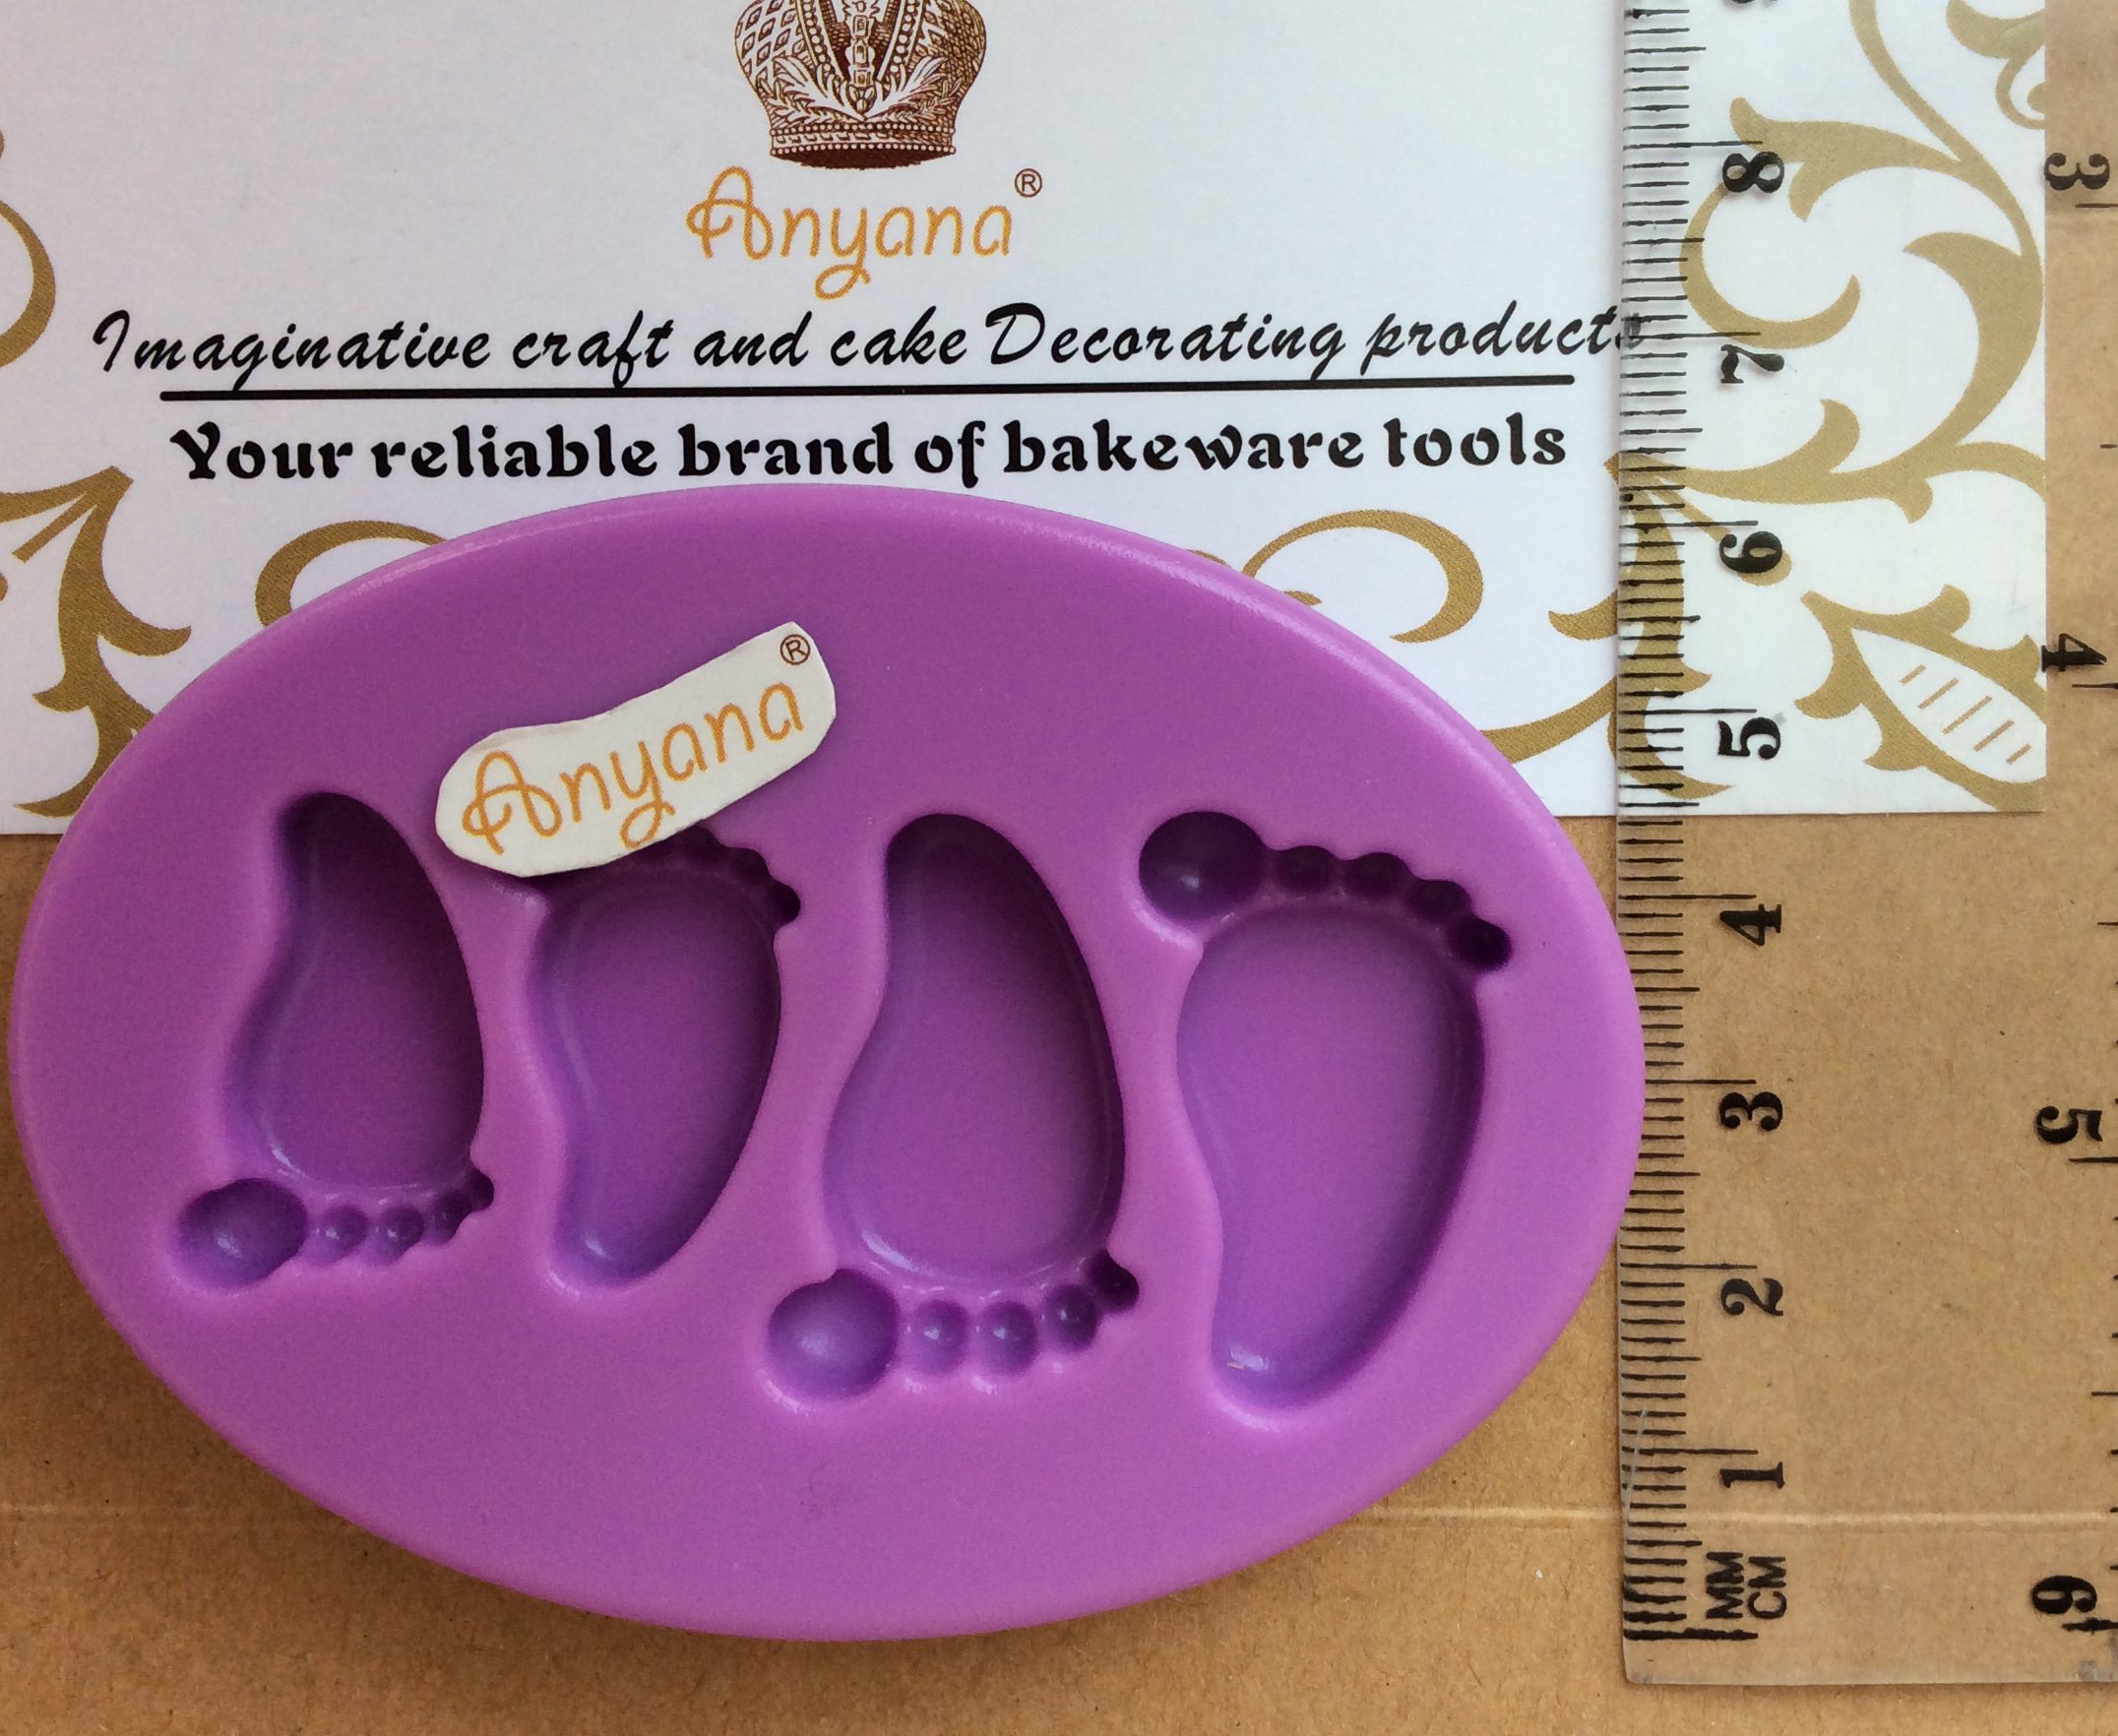 Anyana Baby foot print Baking Molds footstep Silicone Fondant molds baby shower Cake Decorating Tools Gumpaste christening cupcake topper decorations party resin Clay Chocolate Candy Molds easy to use